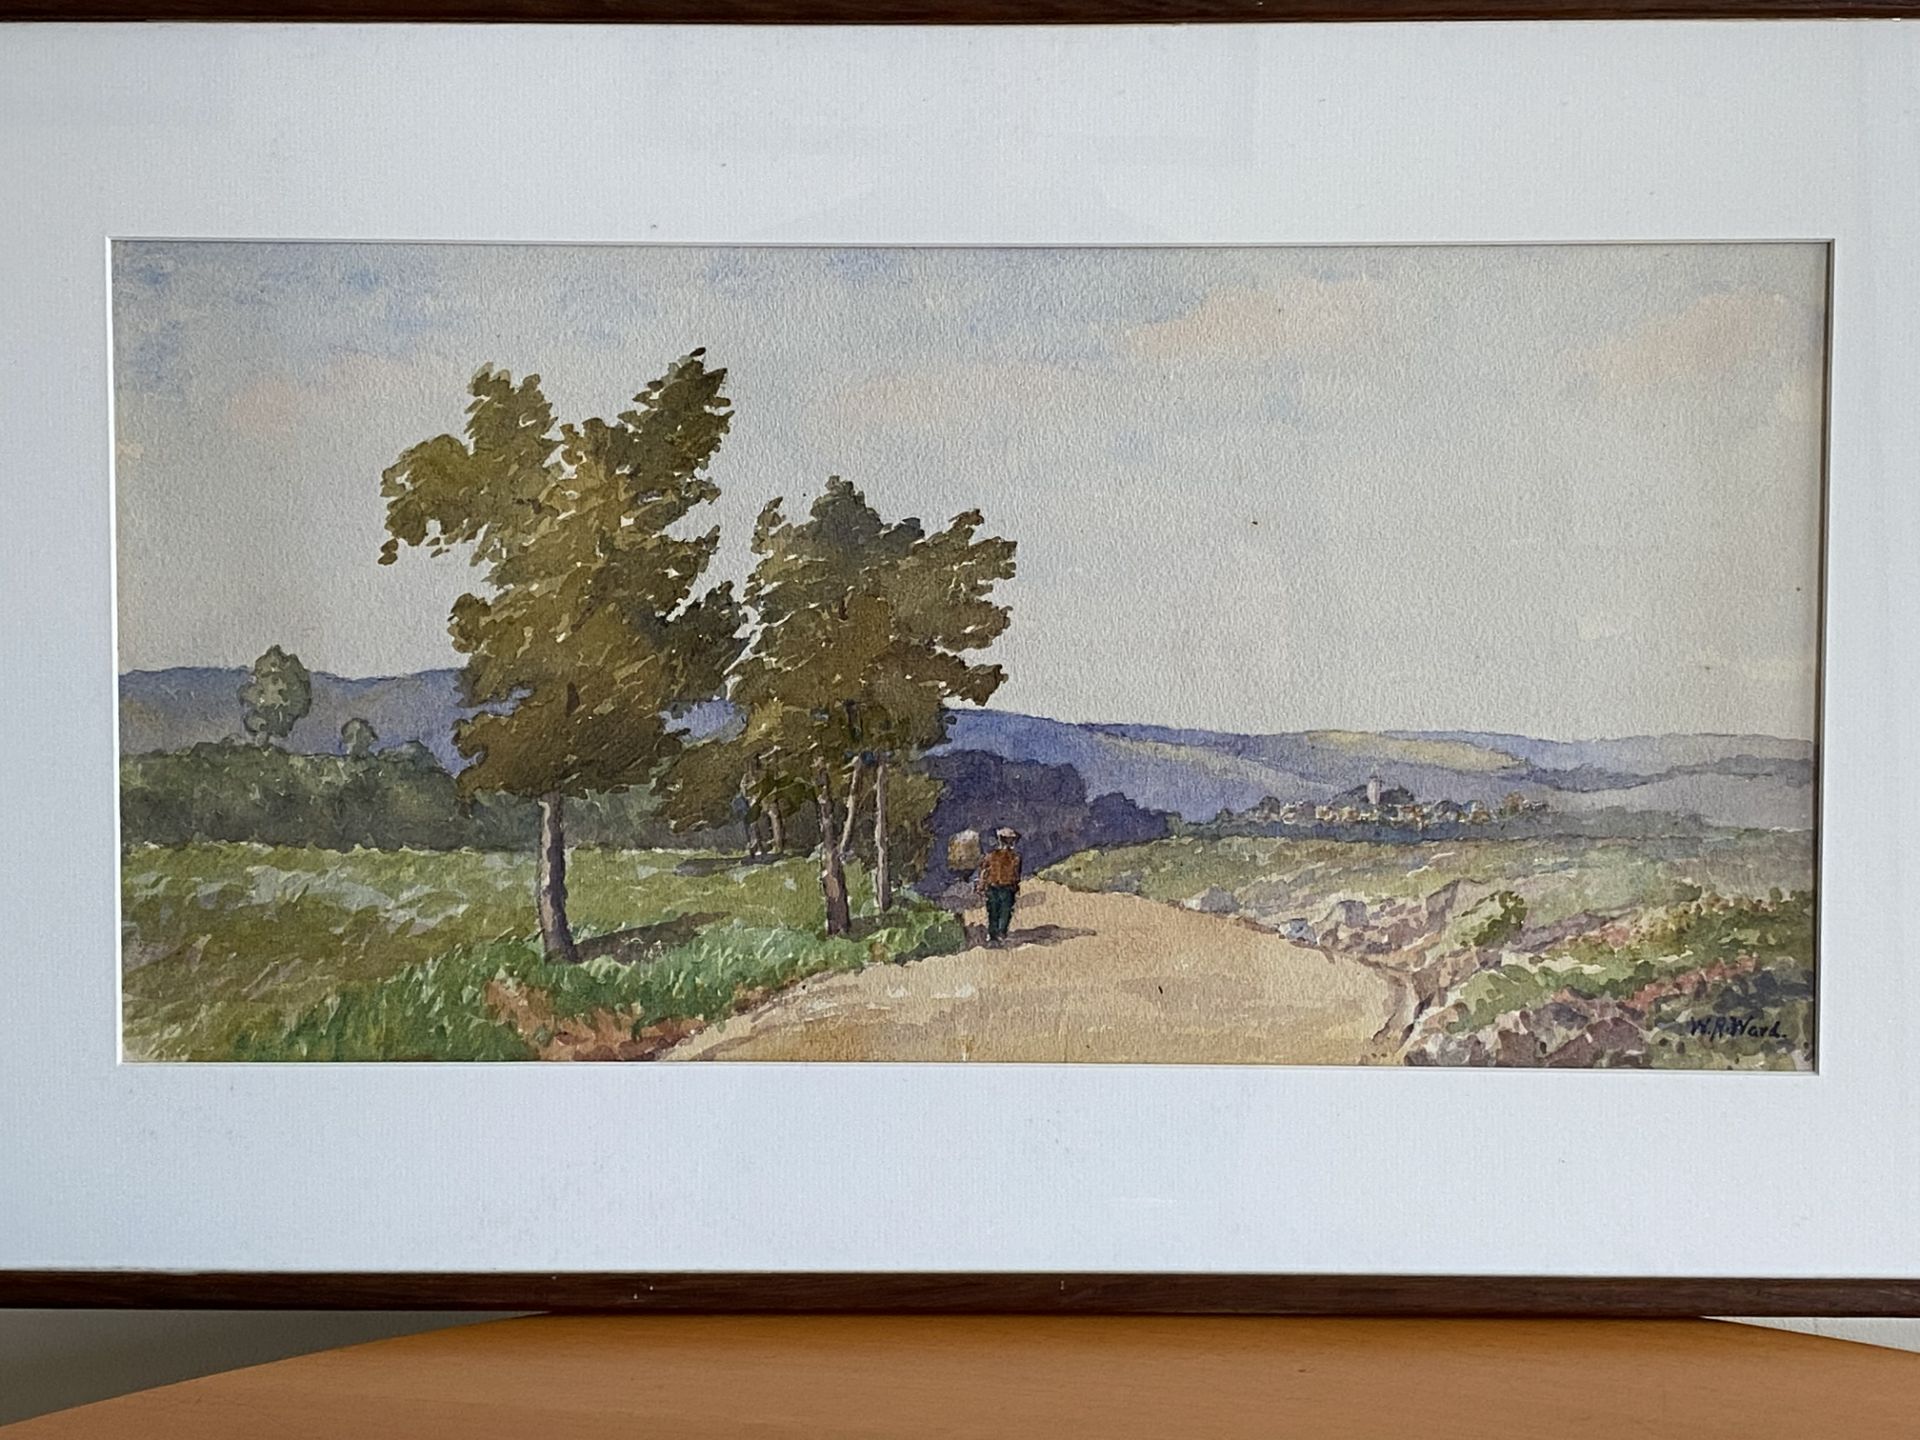 W.R. Ward - framed and glazed watercolour - Image 2 of 4